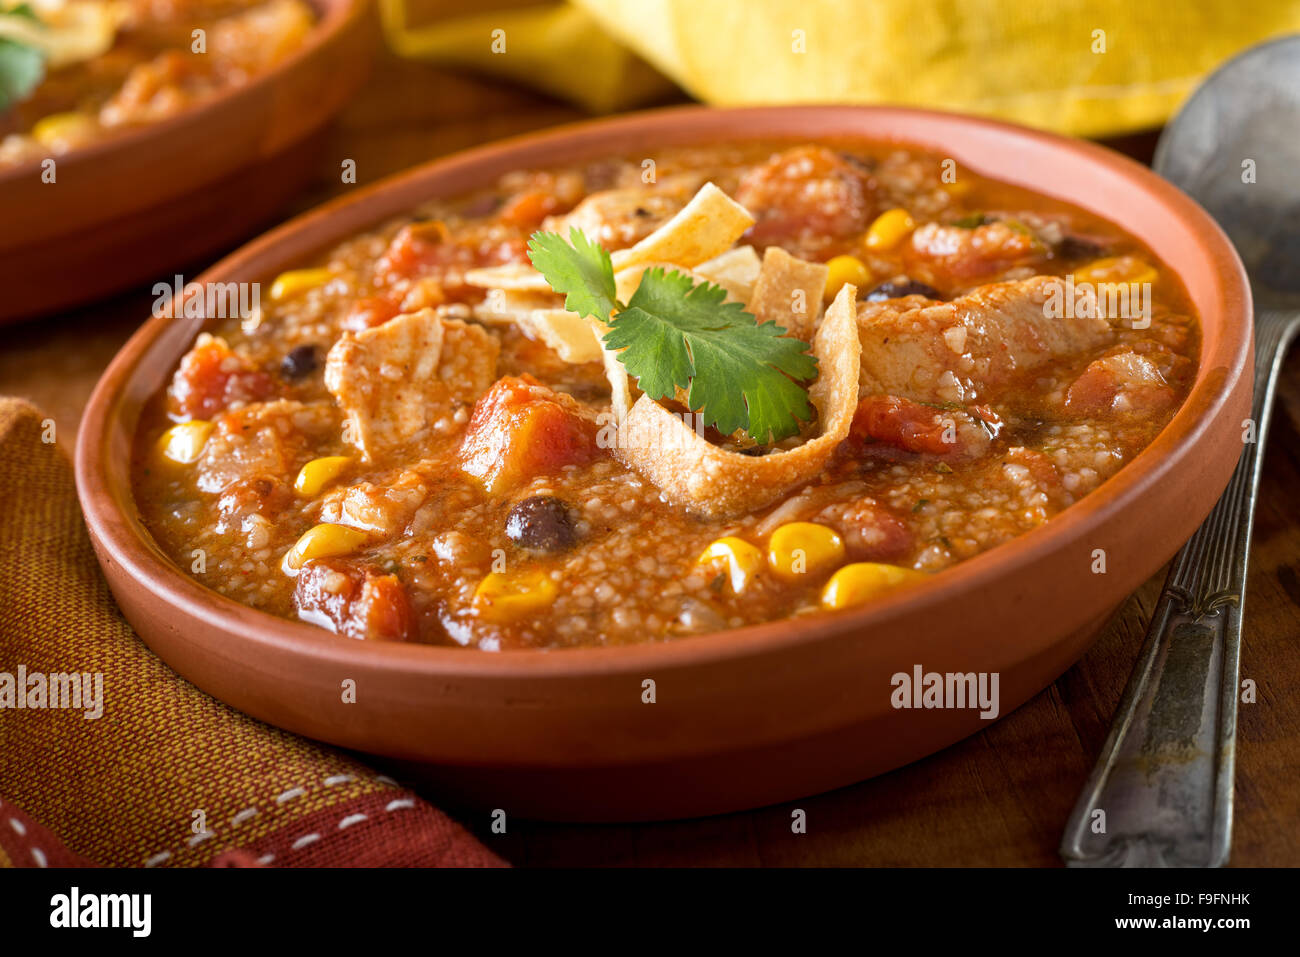 A bowl of delicious home made chicken tortilla soup with chicken, corn, black bean, tomato, hominy, and tortilla. Stock Photo